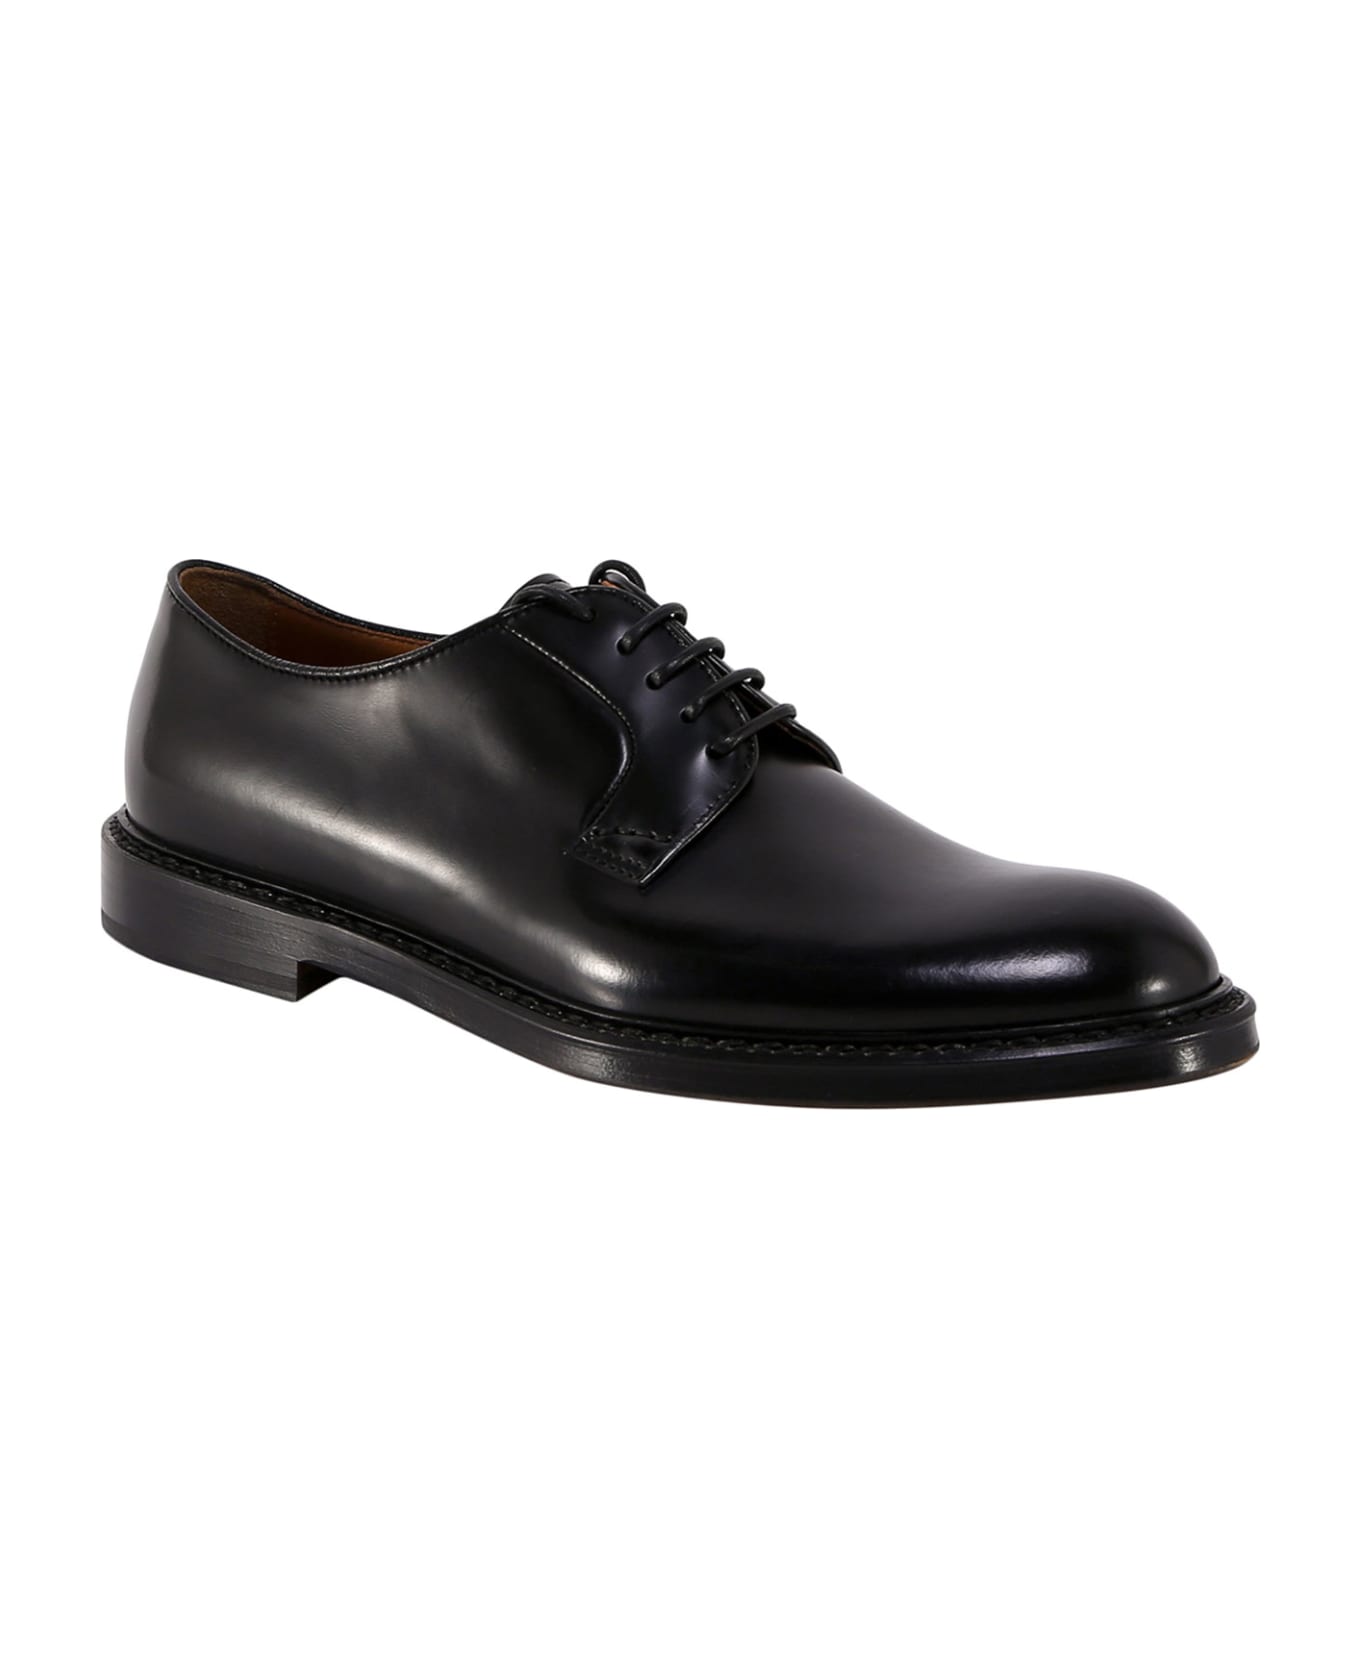 Doucal's Horse Lace Up Shoe - Black ローファー＆デッキシューズ